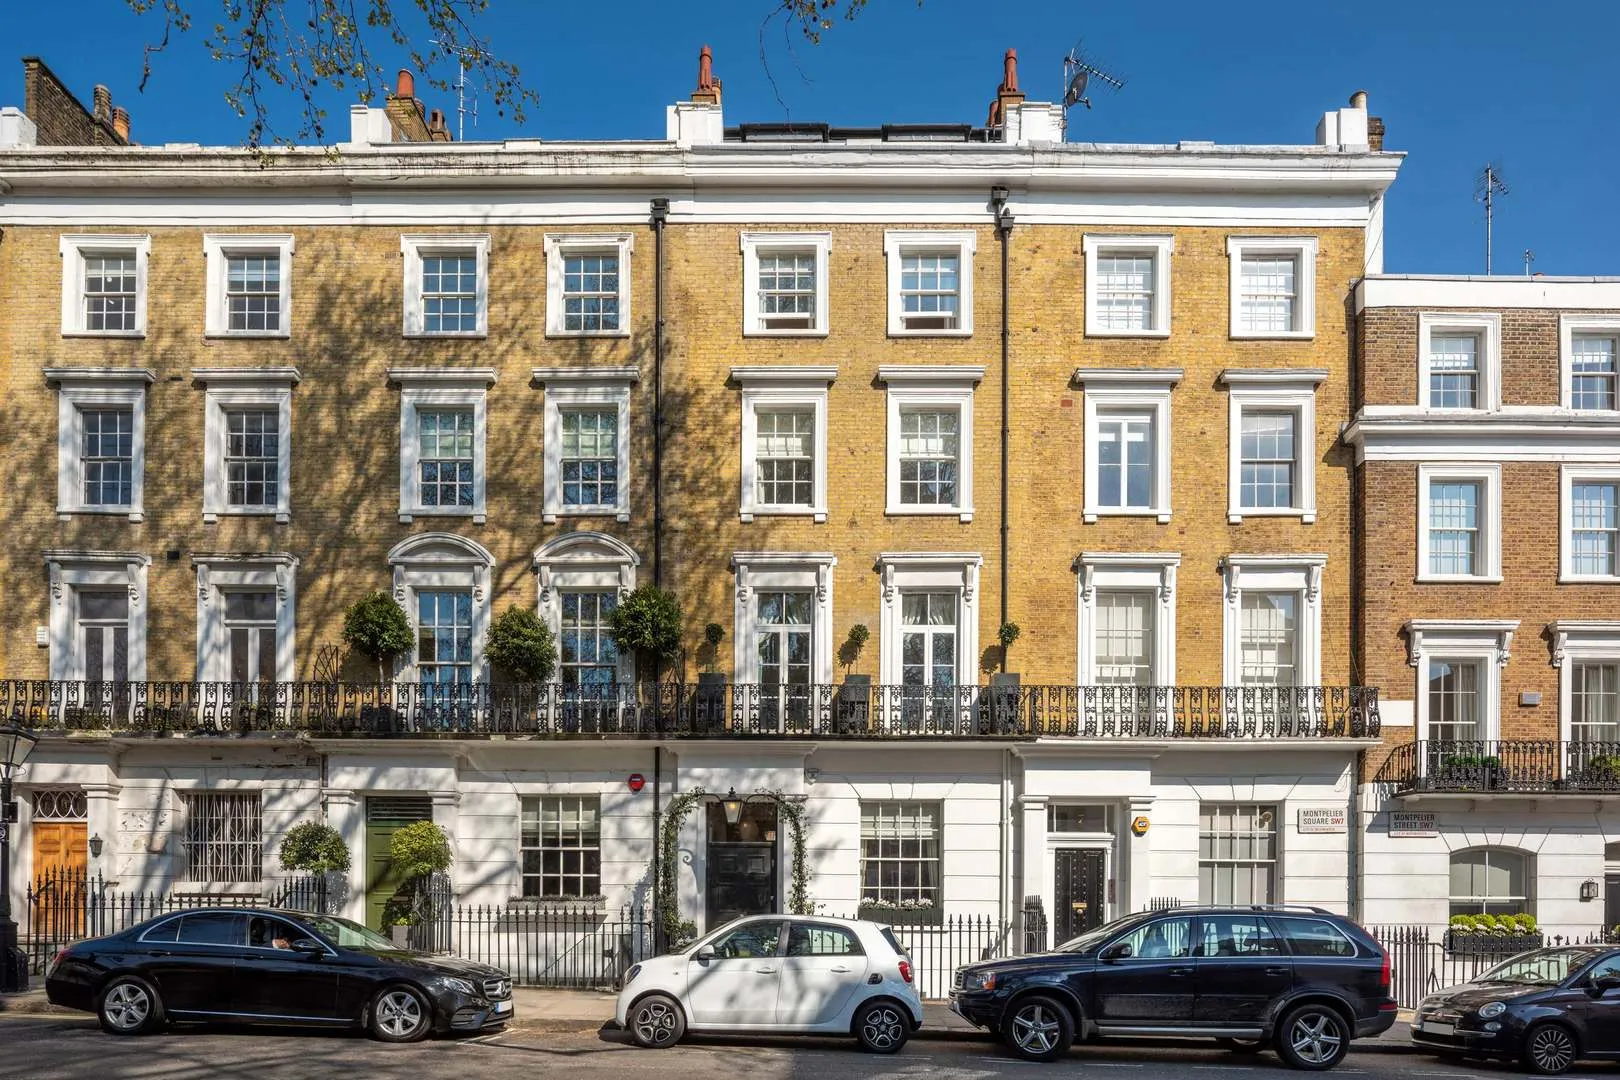 Montpelier Square, holiday home in Knightsbridge, London